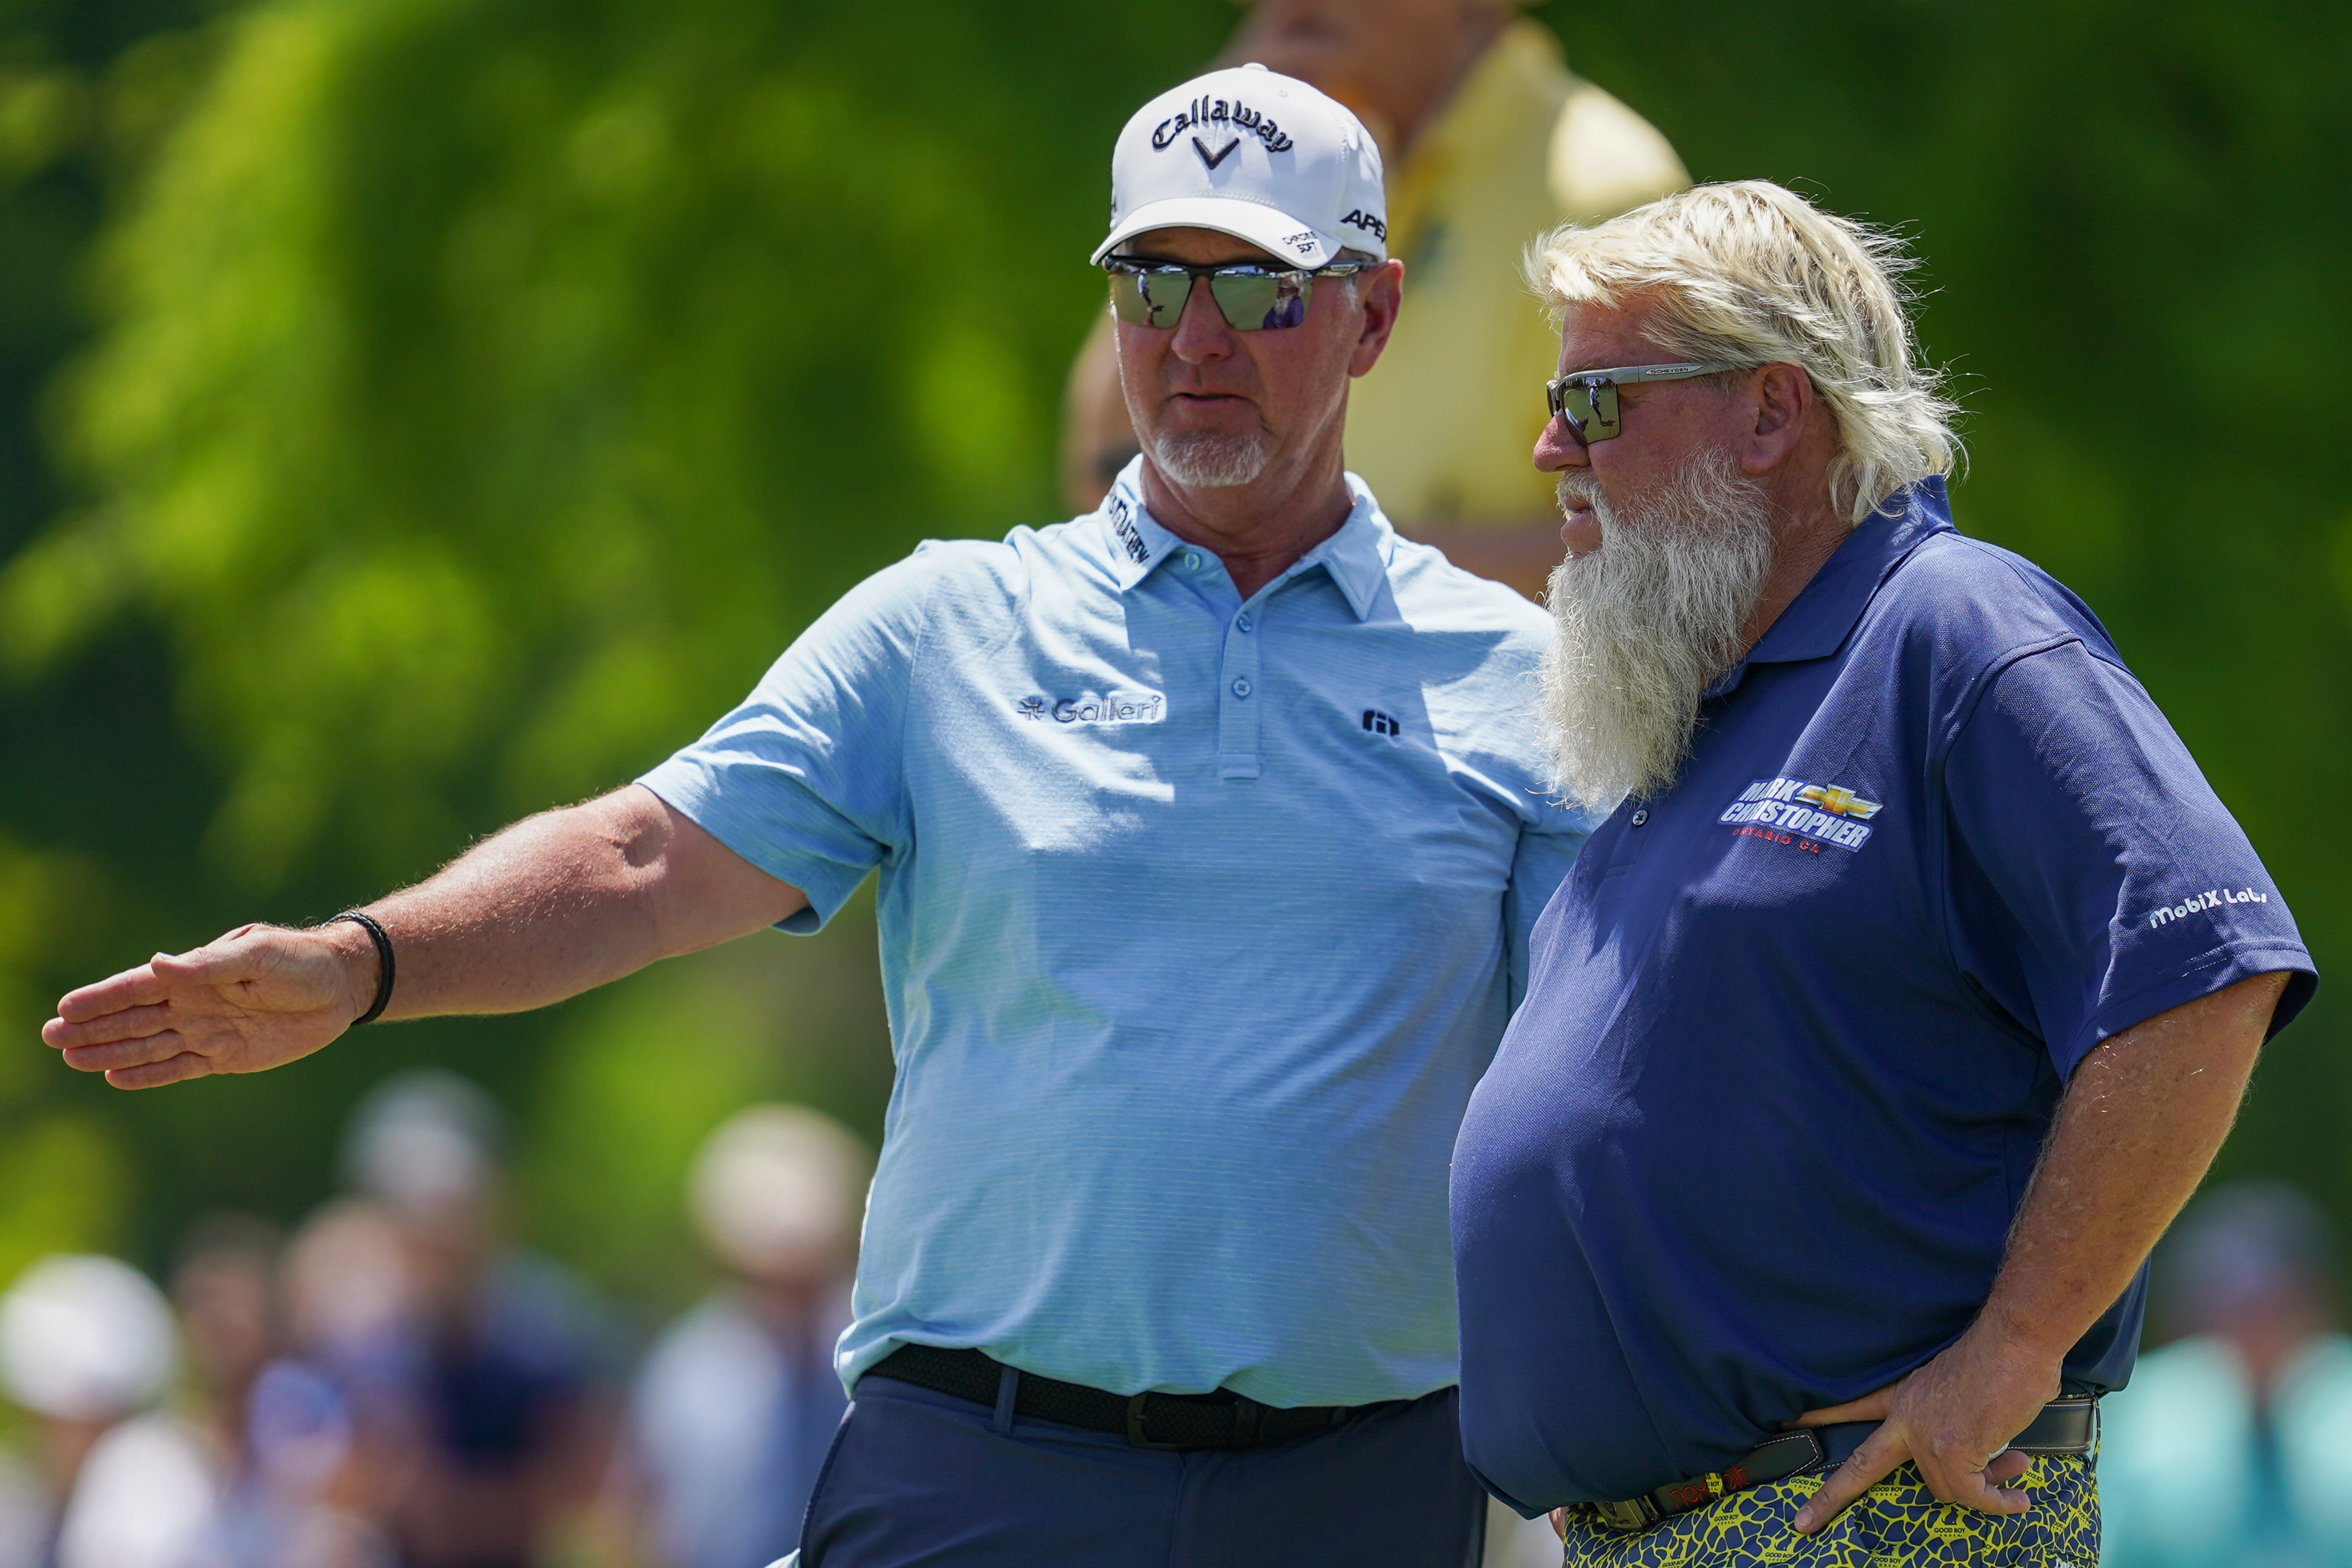 The John Daly/David Duval experiment at the Zurich Classic did not go well